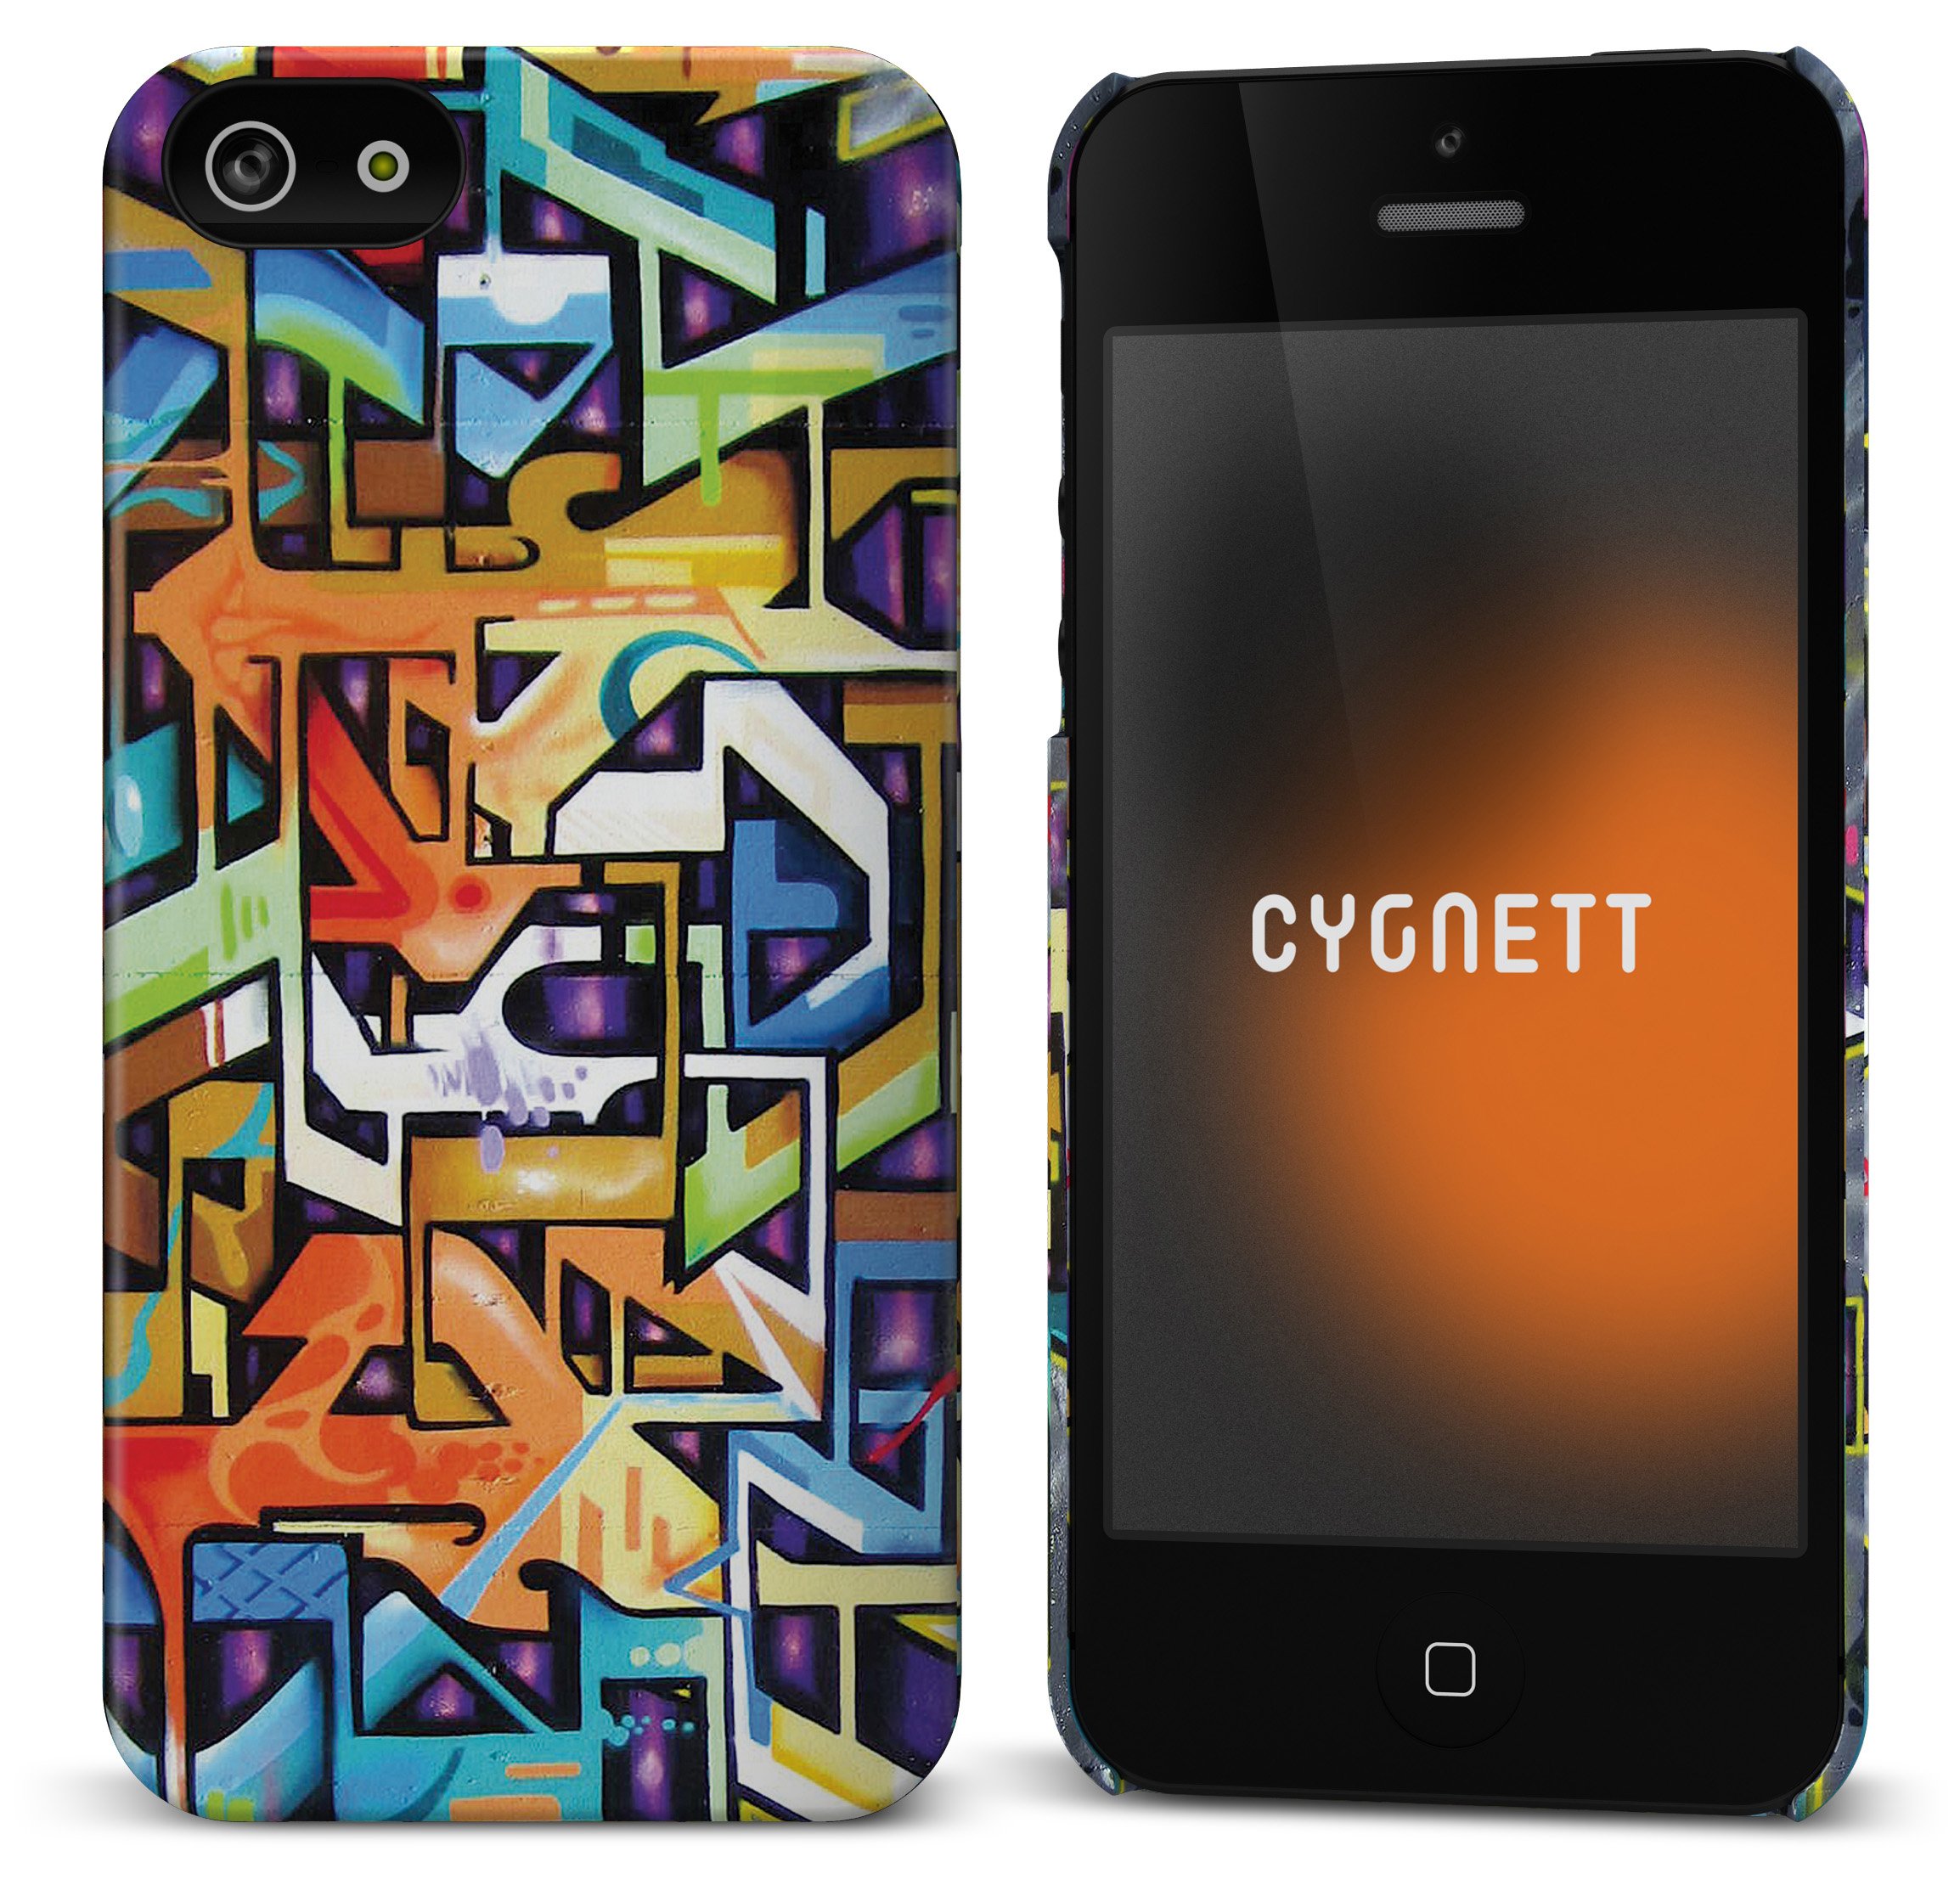 Cygnett Cases Shows off Their Booth at CES 2013